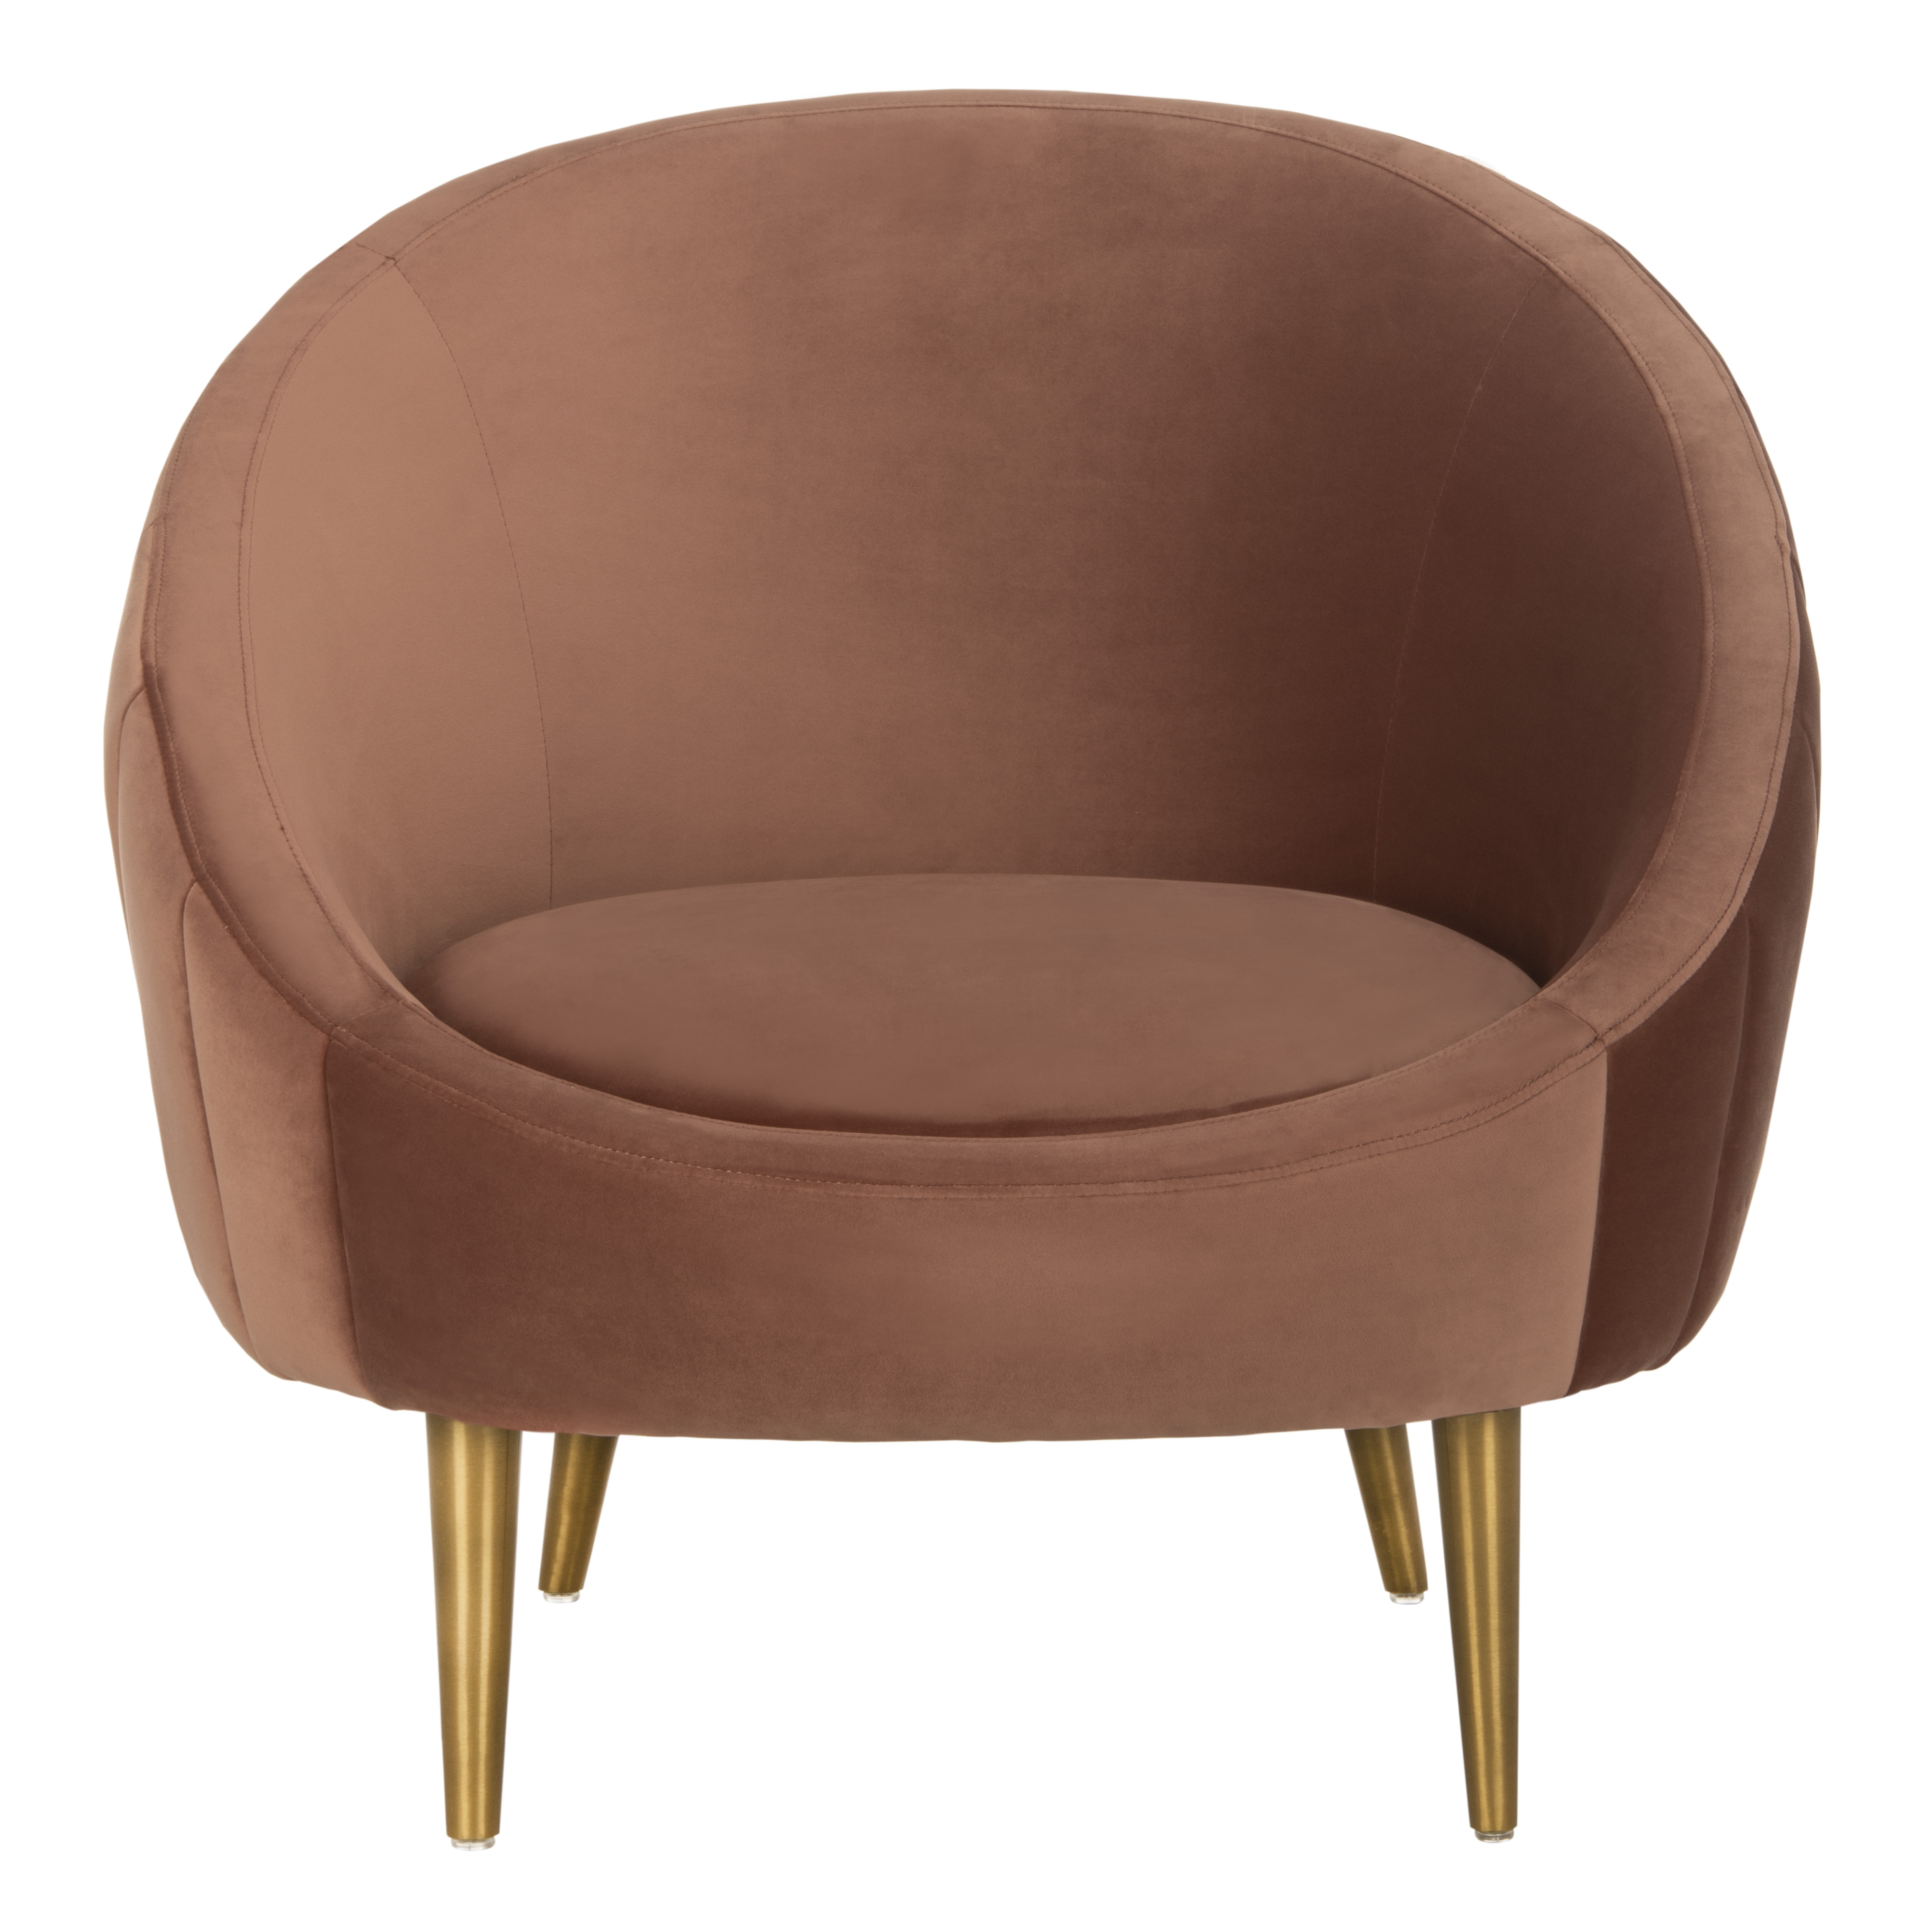 Razia Channel Tufted Tub Chair - Dusty Rose - Arlo Home - Image 2